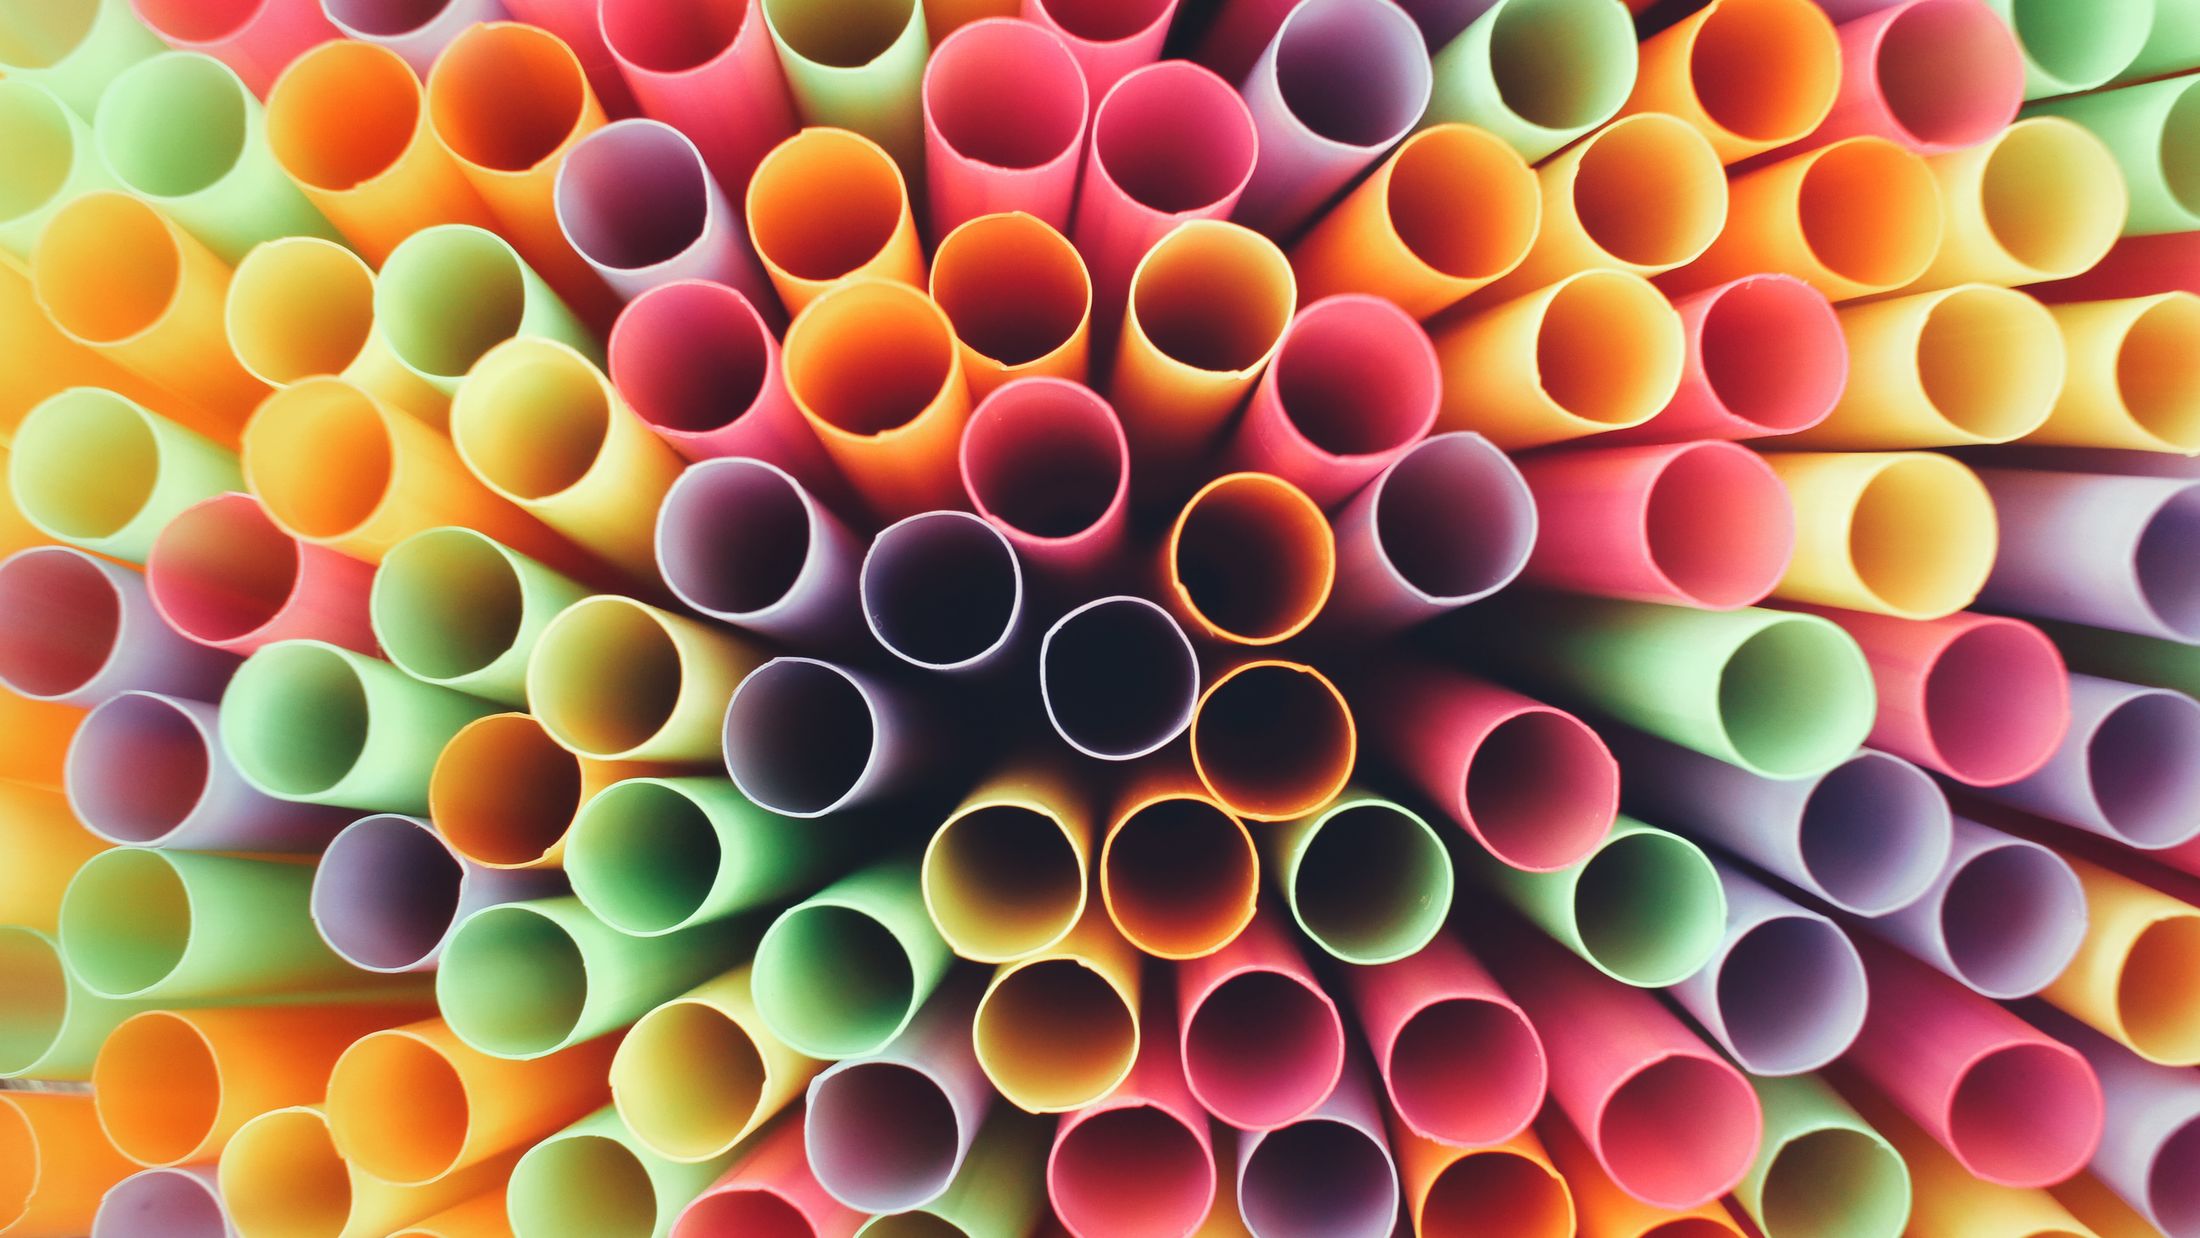 Colorful drinking straws; Shutterstock ID 371291755; PO: Project Italy - Facilities images; Job: Project Italy - Facilities images; Client: H&J/Citalia